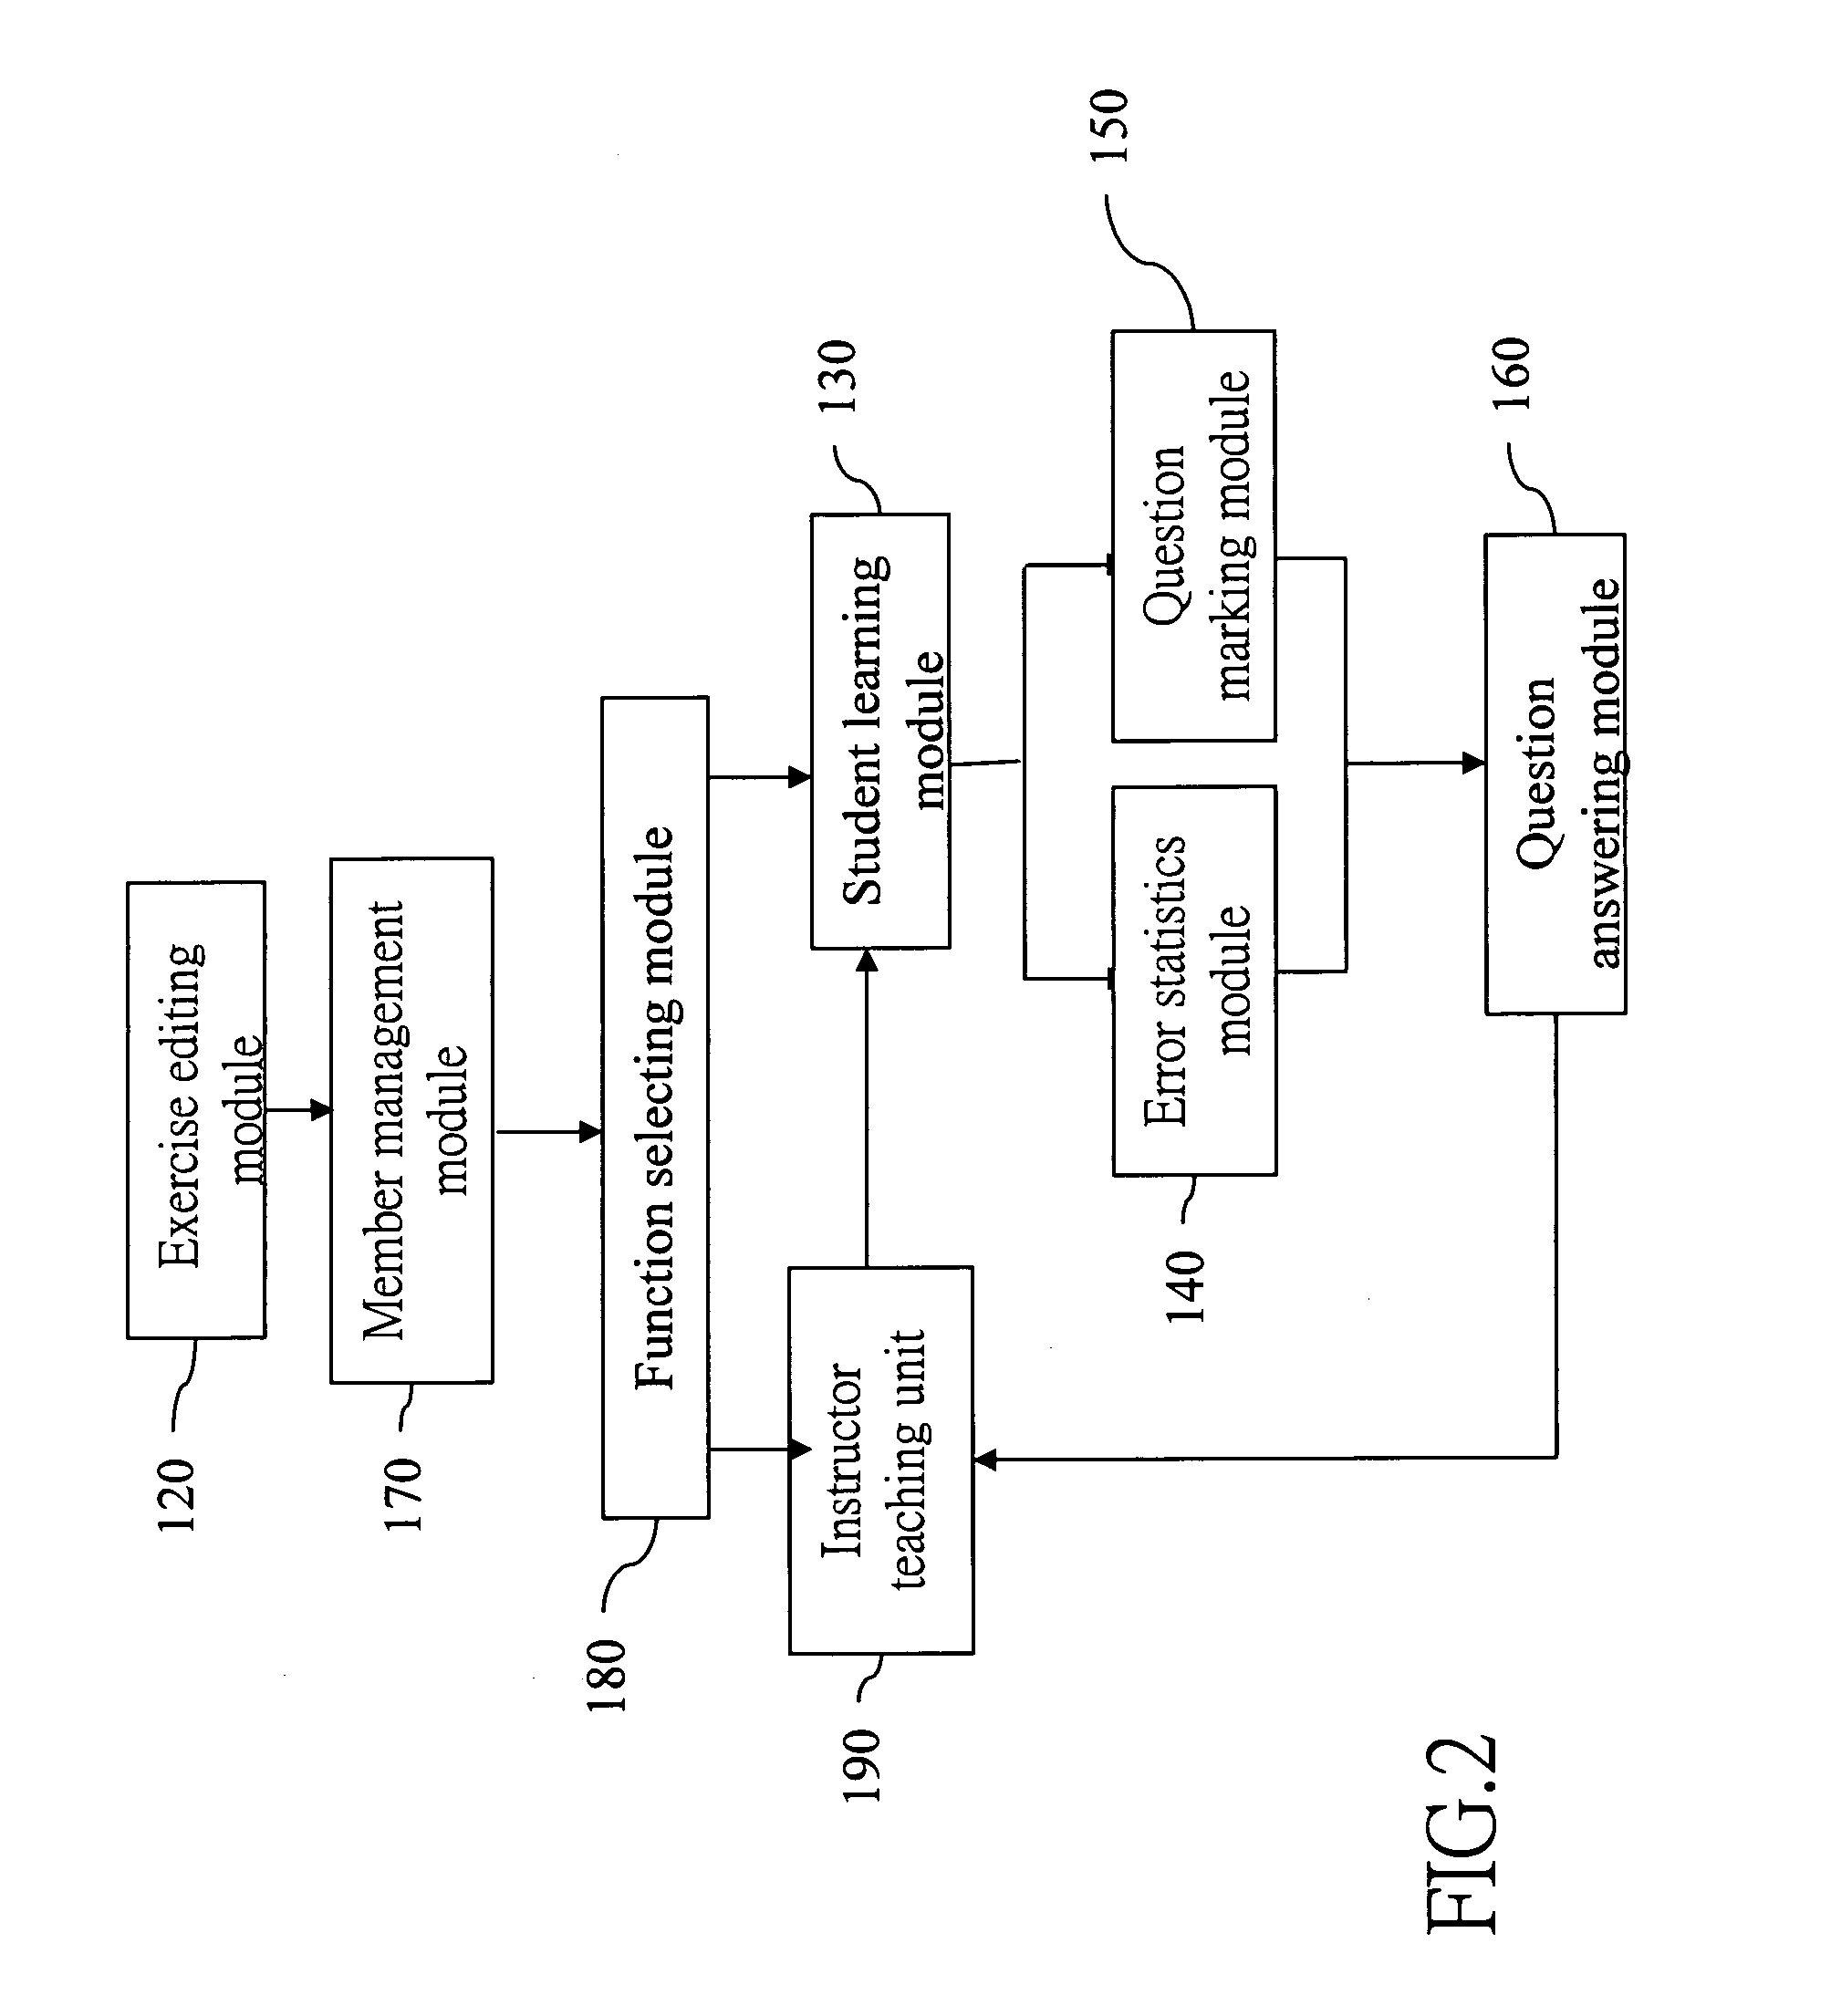 Remote instruction system and method